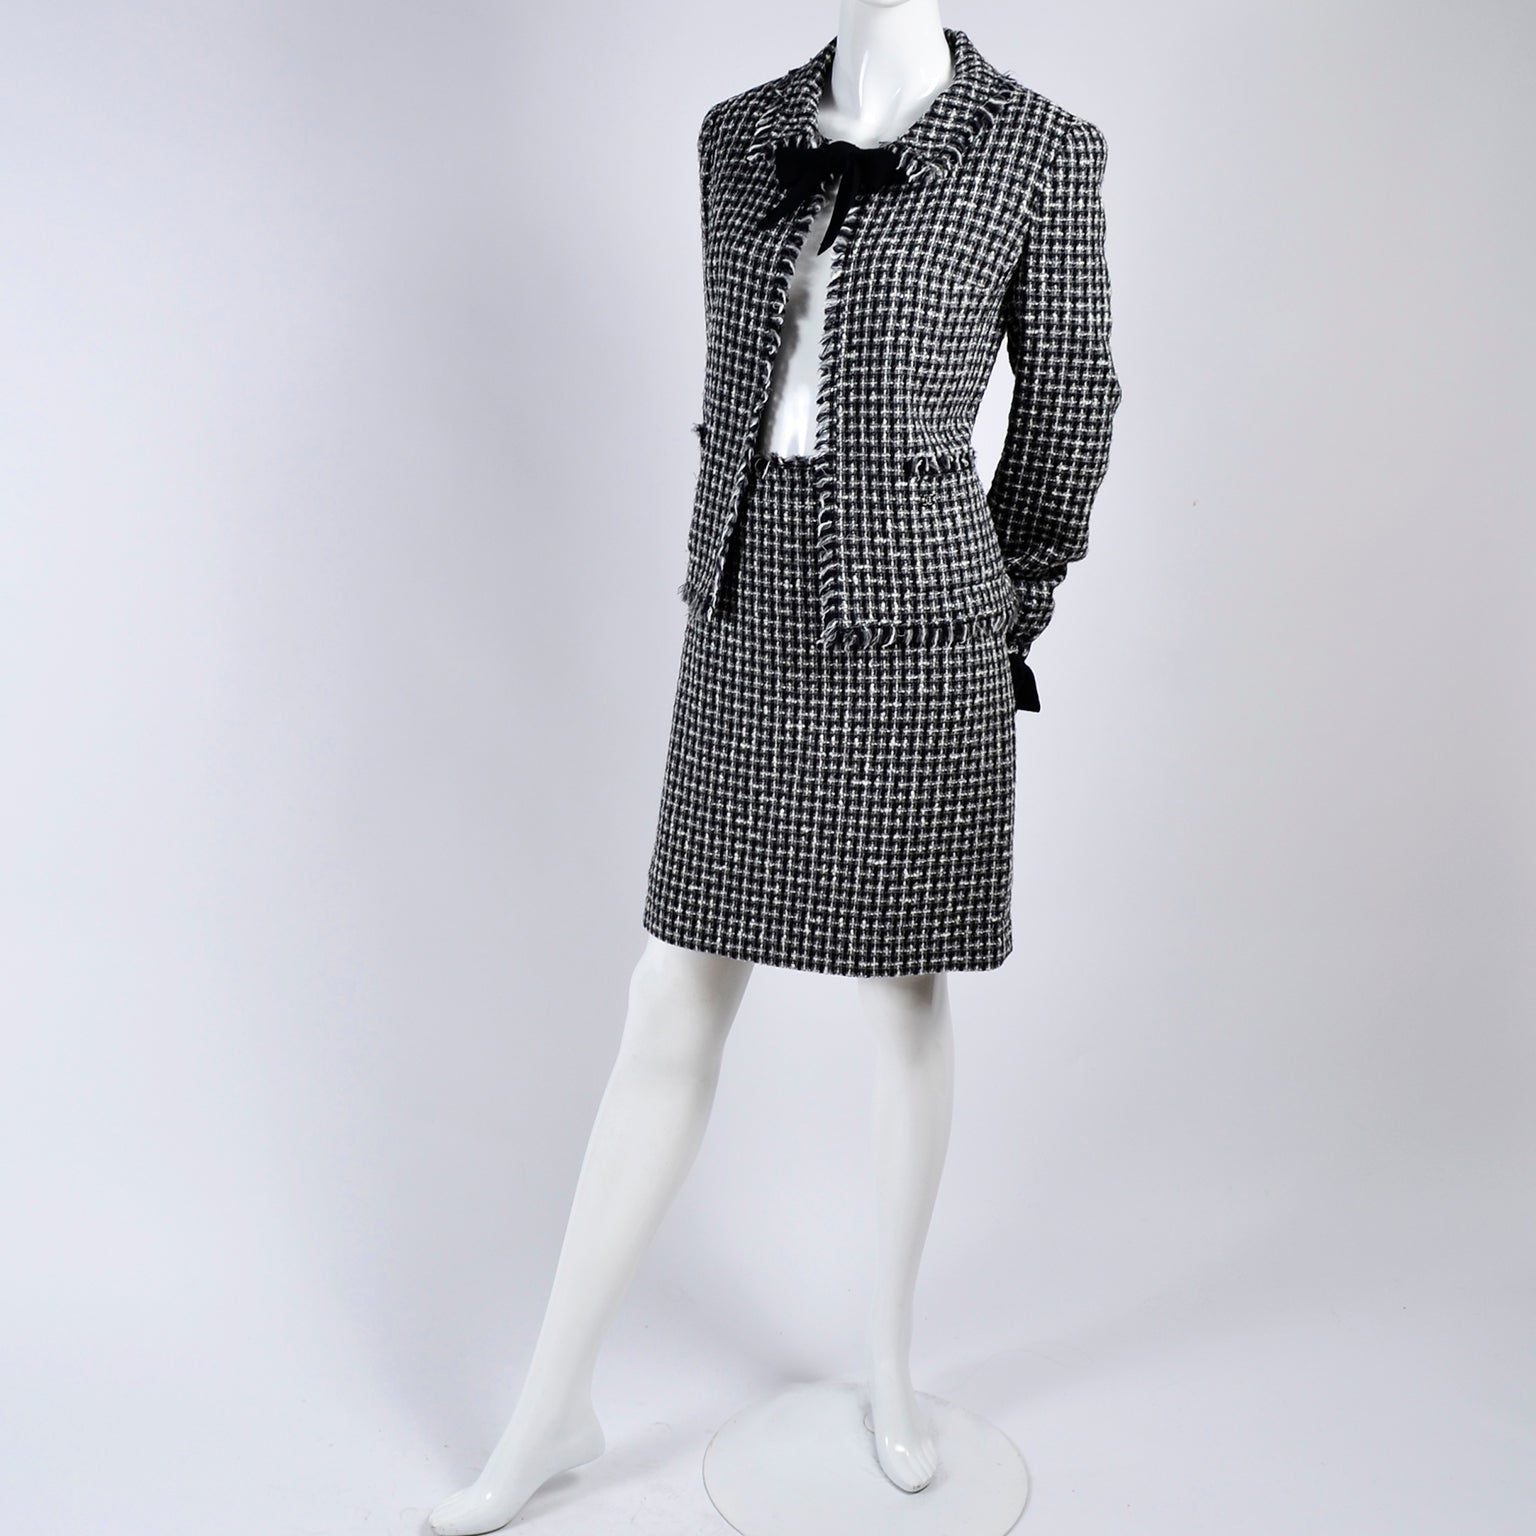 Chanel 2004 Black & White Lesage Tweed Skirt Suit w/ Bow